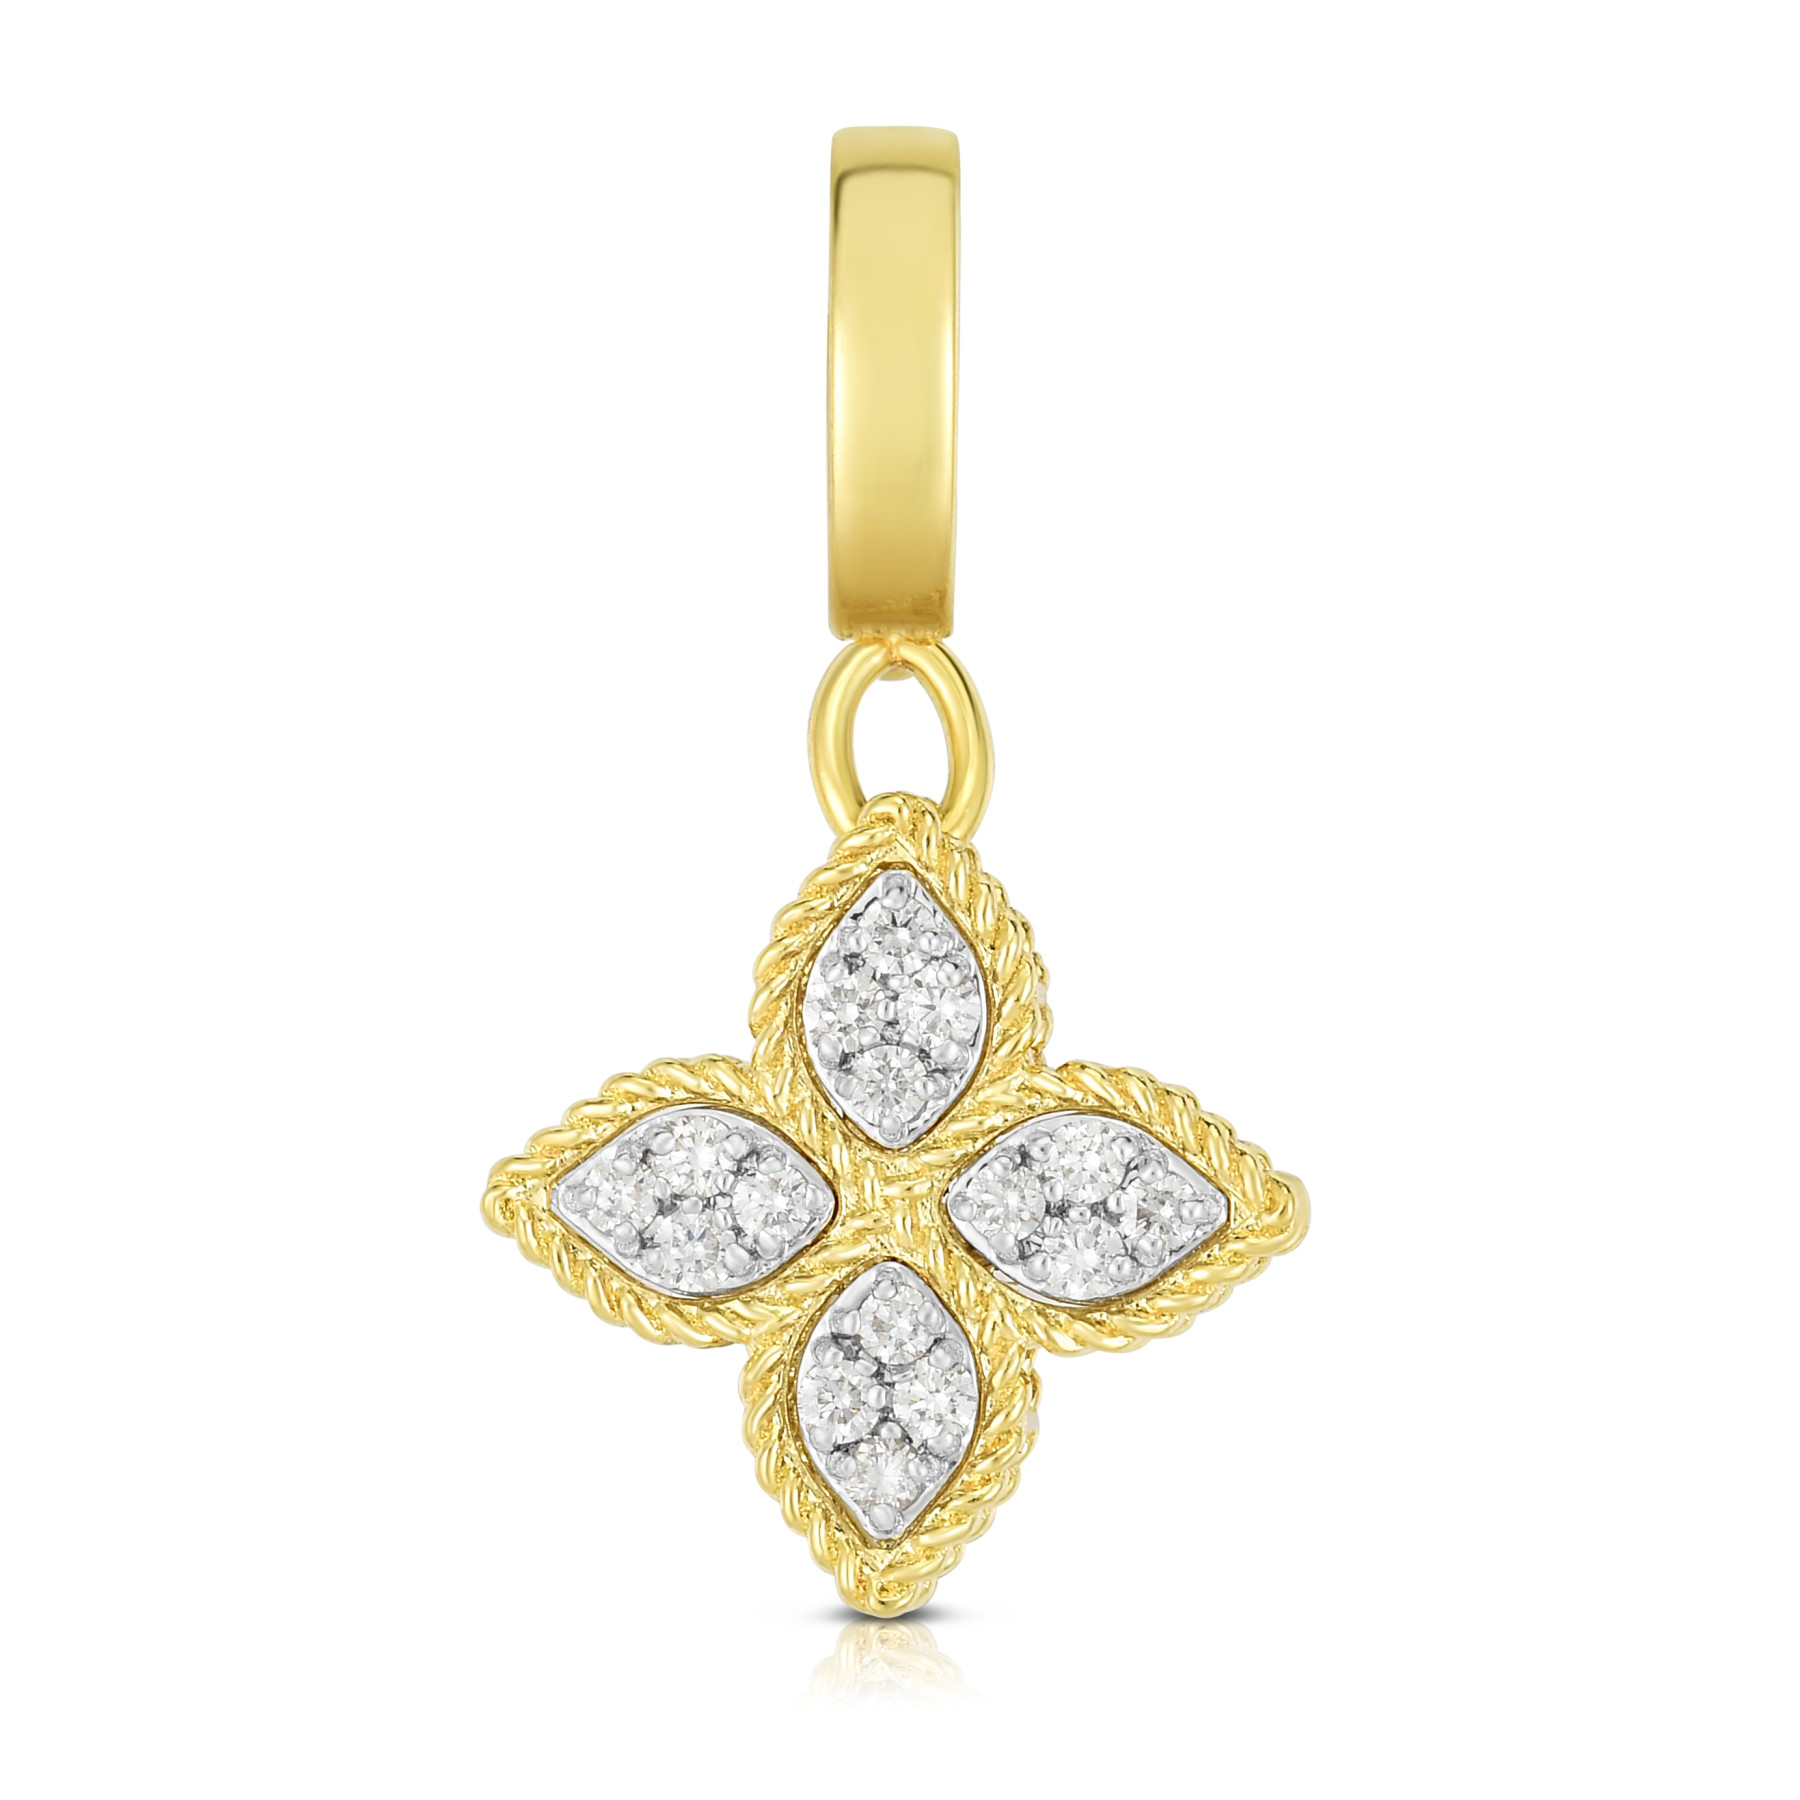 Roberto Coin Diamond Flower Charm in Yellow Gold